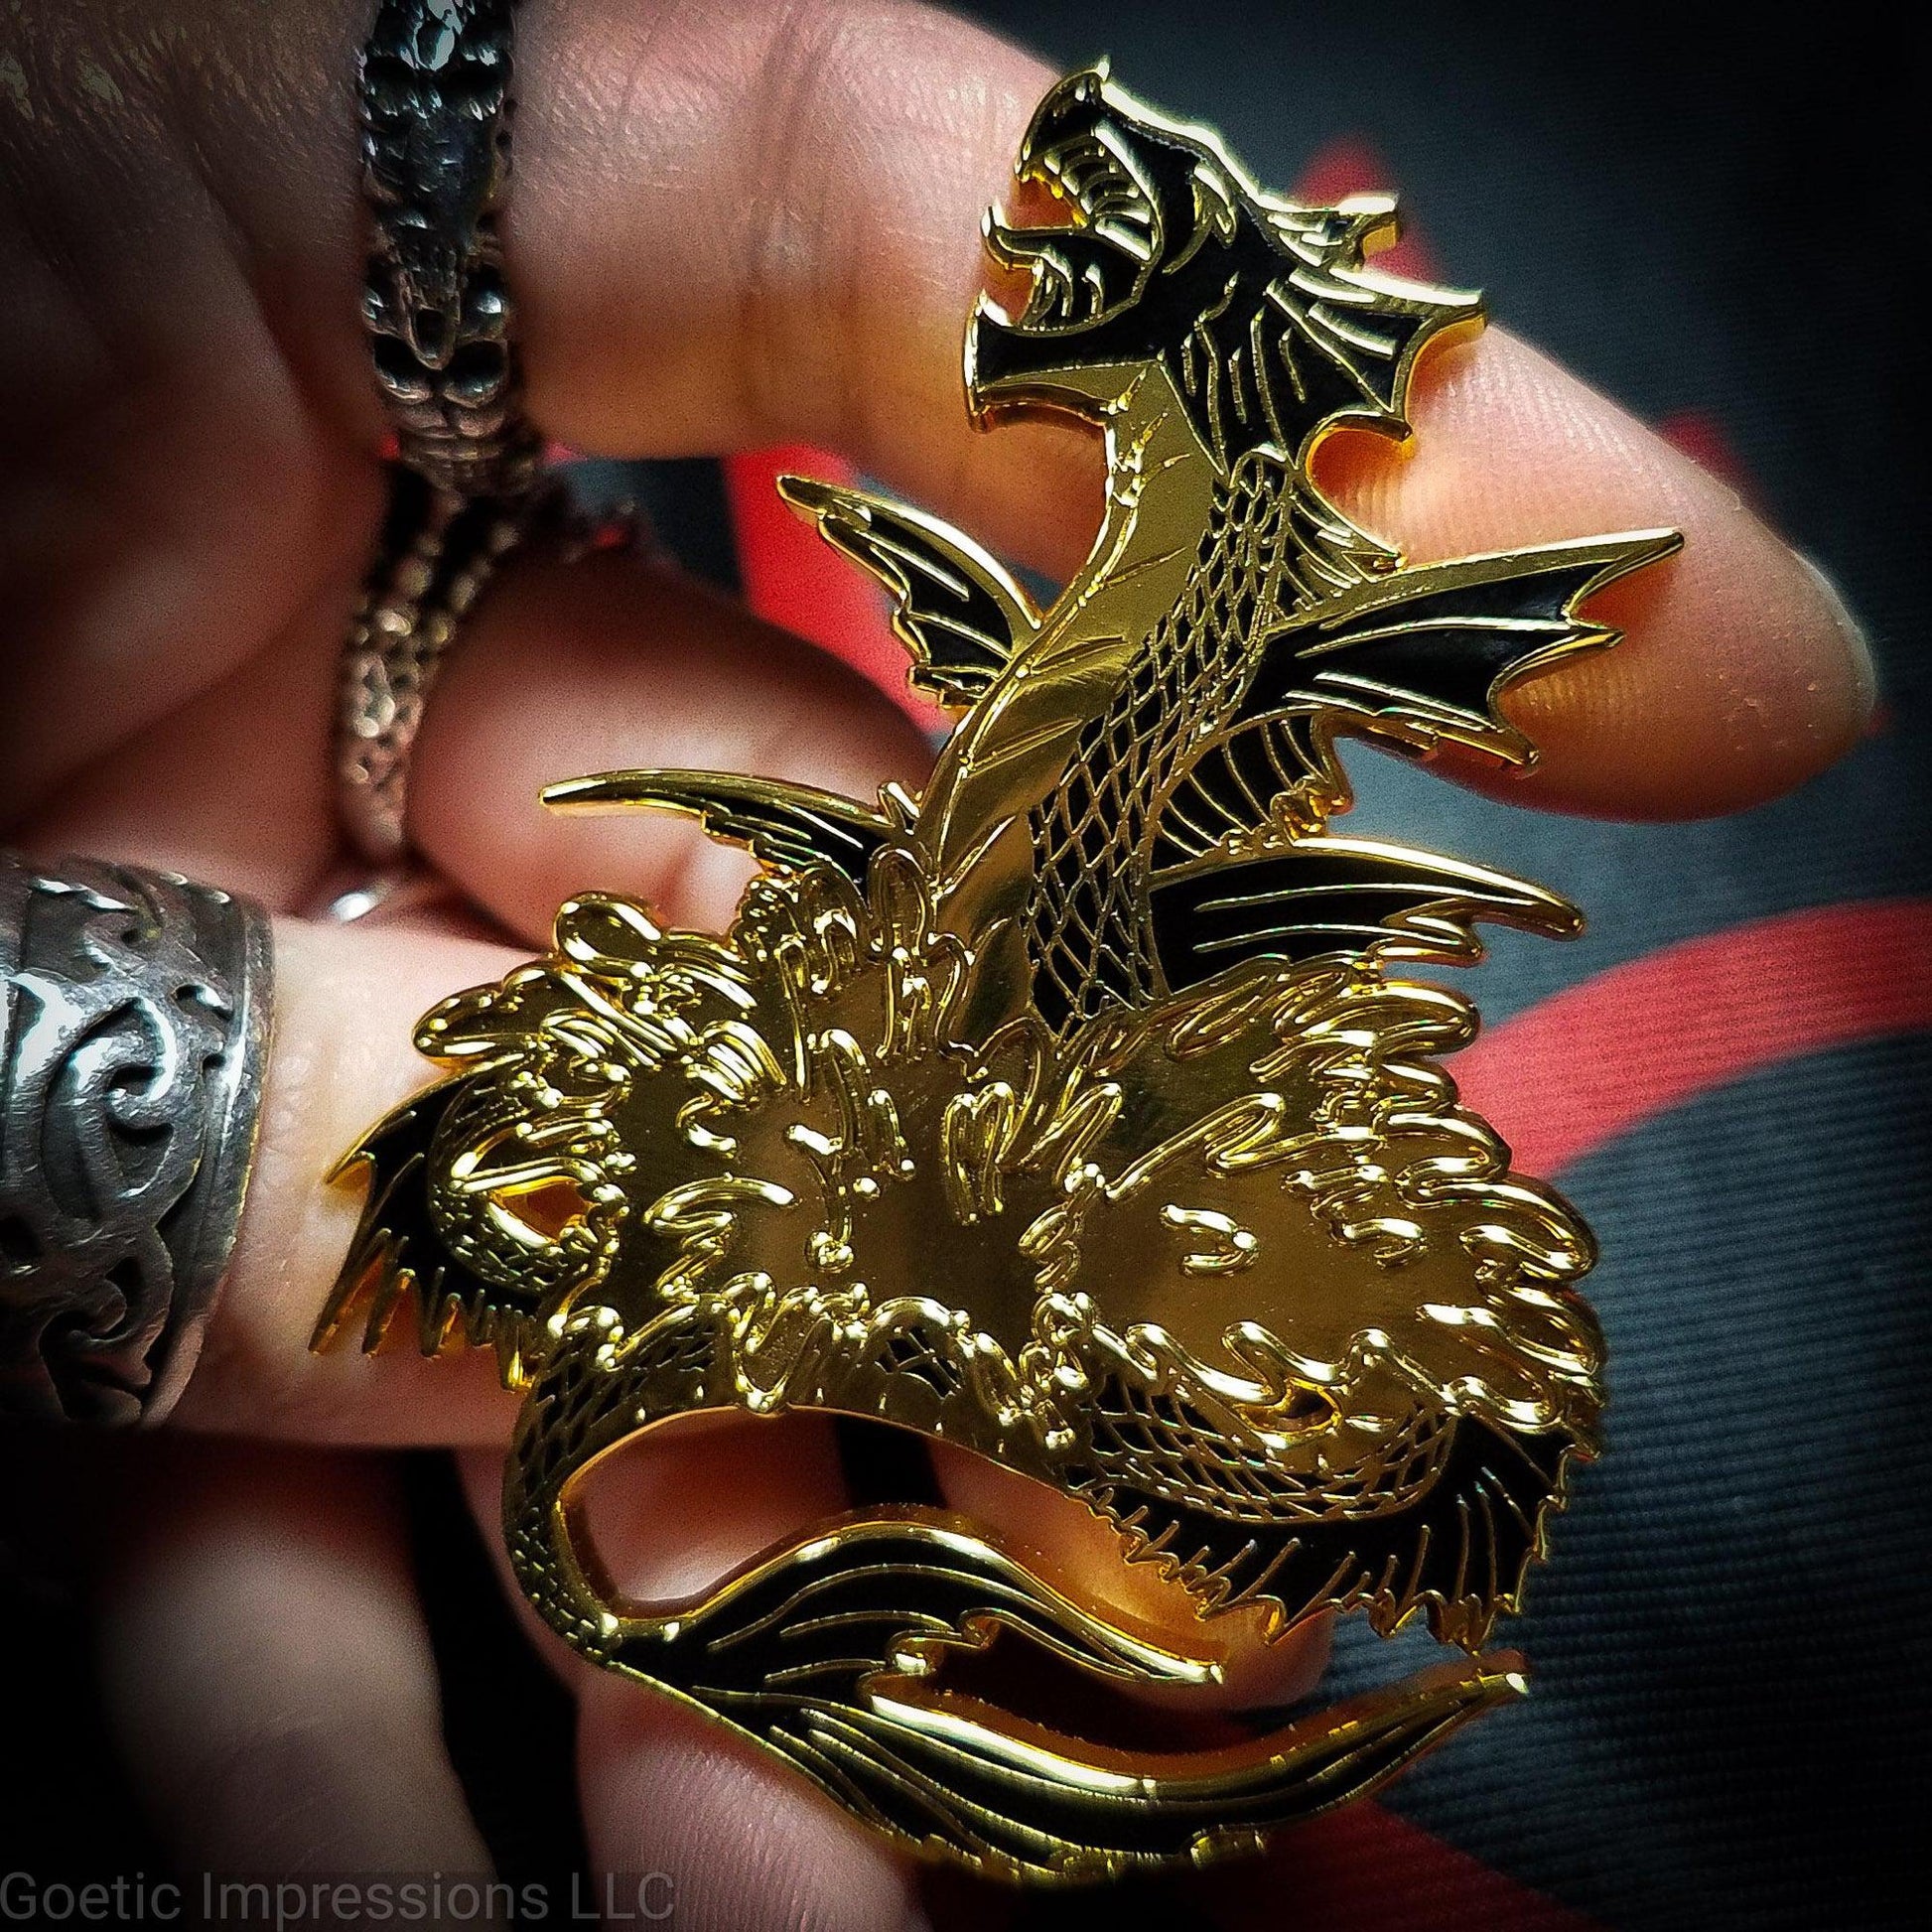 A ringed hand is holding a black and gold hard enamel pin of the sea serpent Leviathan. Leviathan is shown bursting from waters and jaws opened wide. 